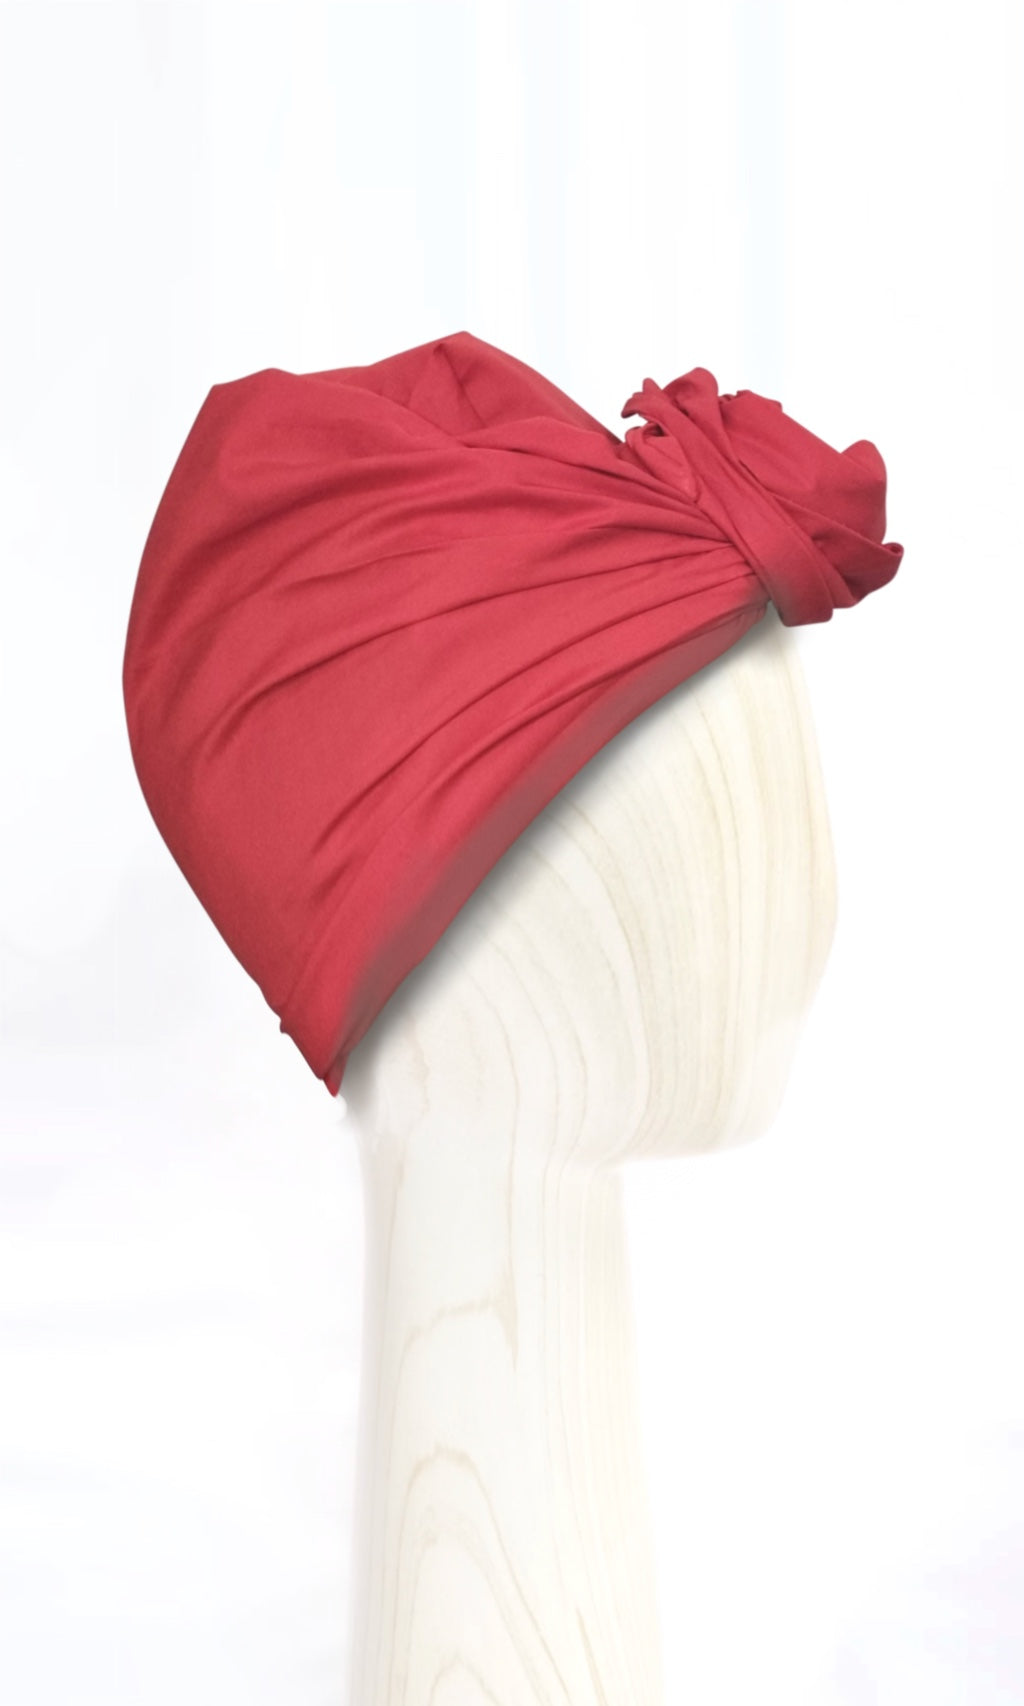 Josephine Wired Head Wrap - Classic Red